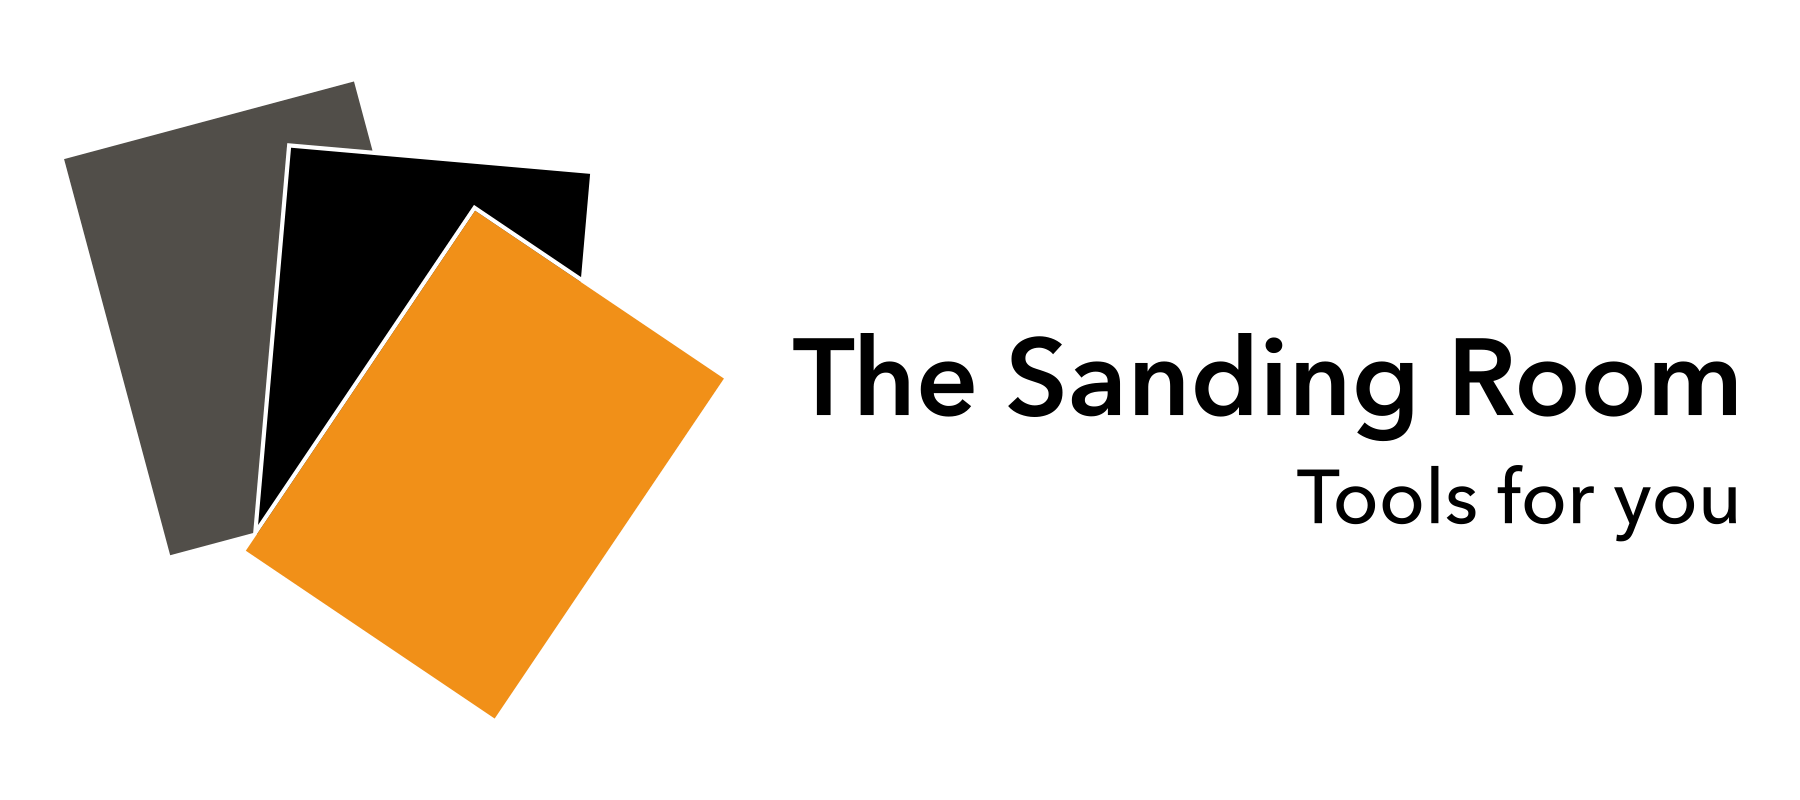 The Sanding Room – 1 Stop Shop for DIY & Tools